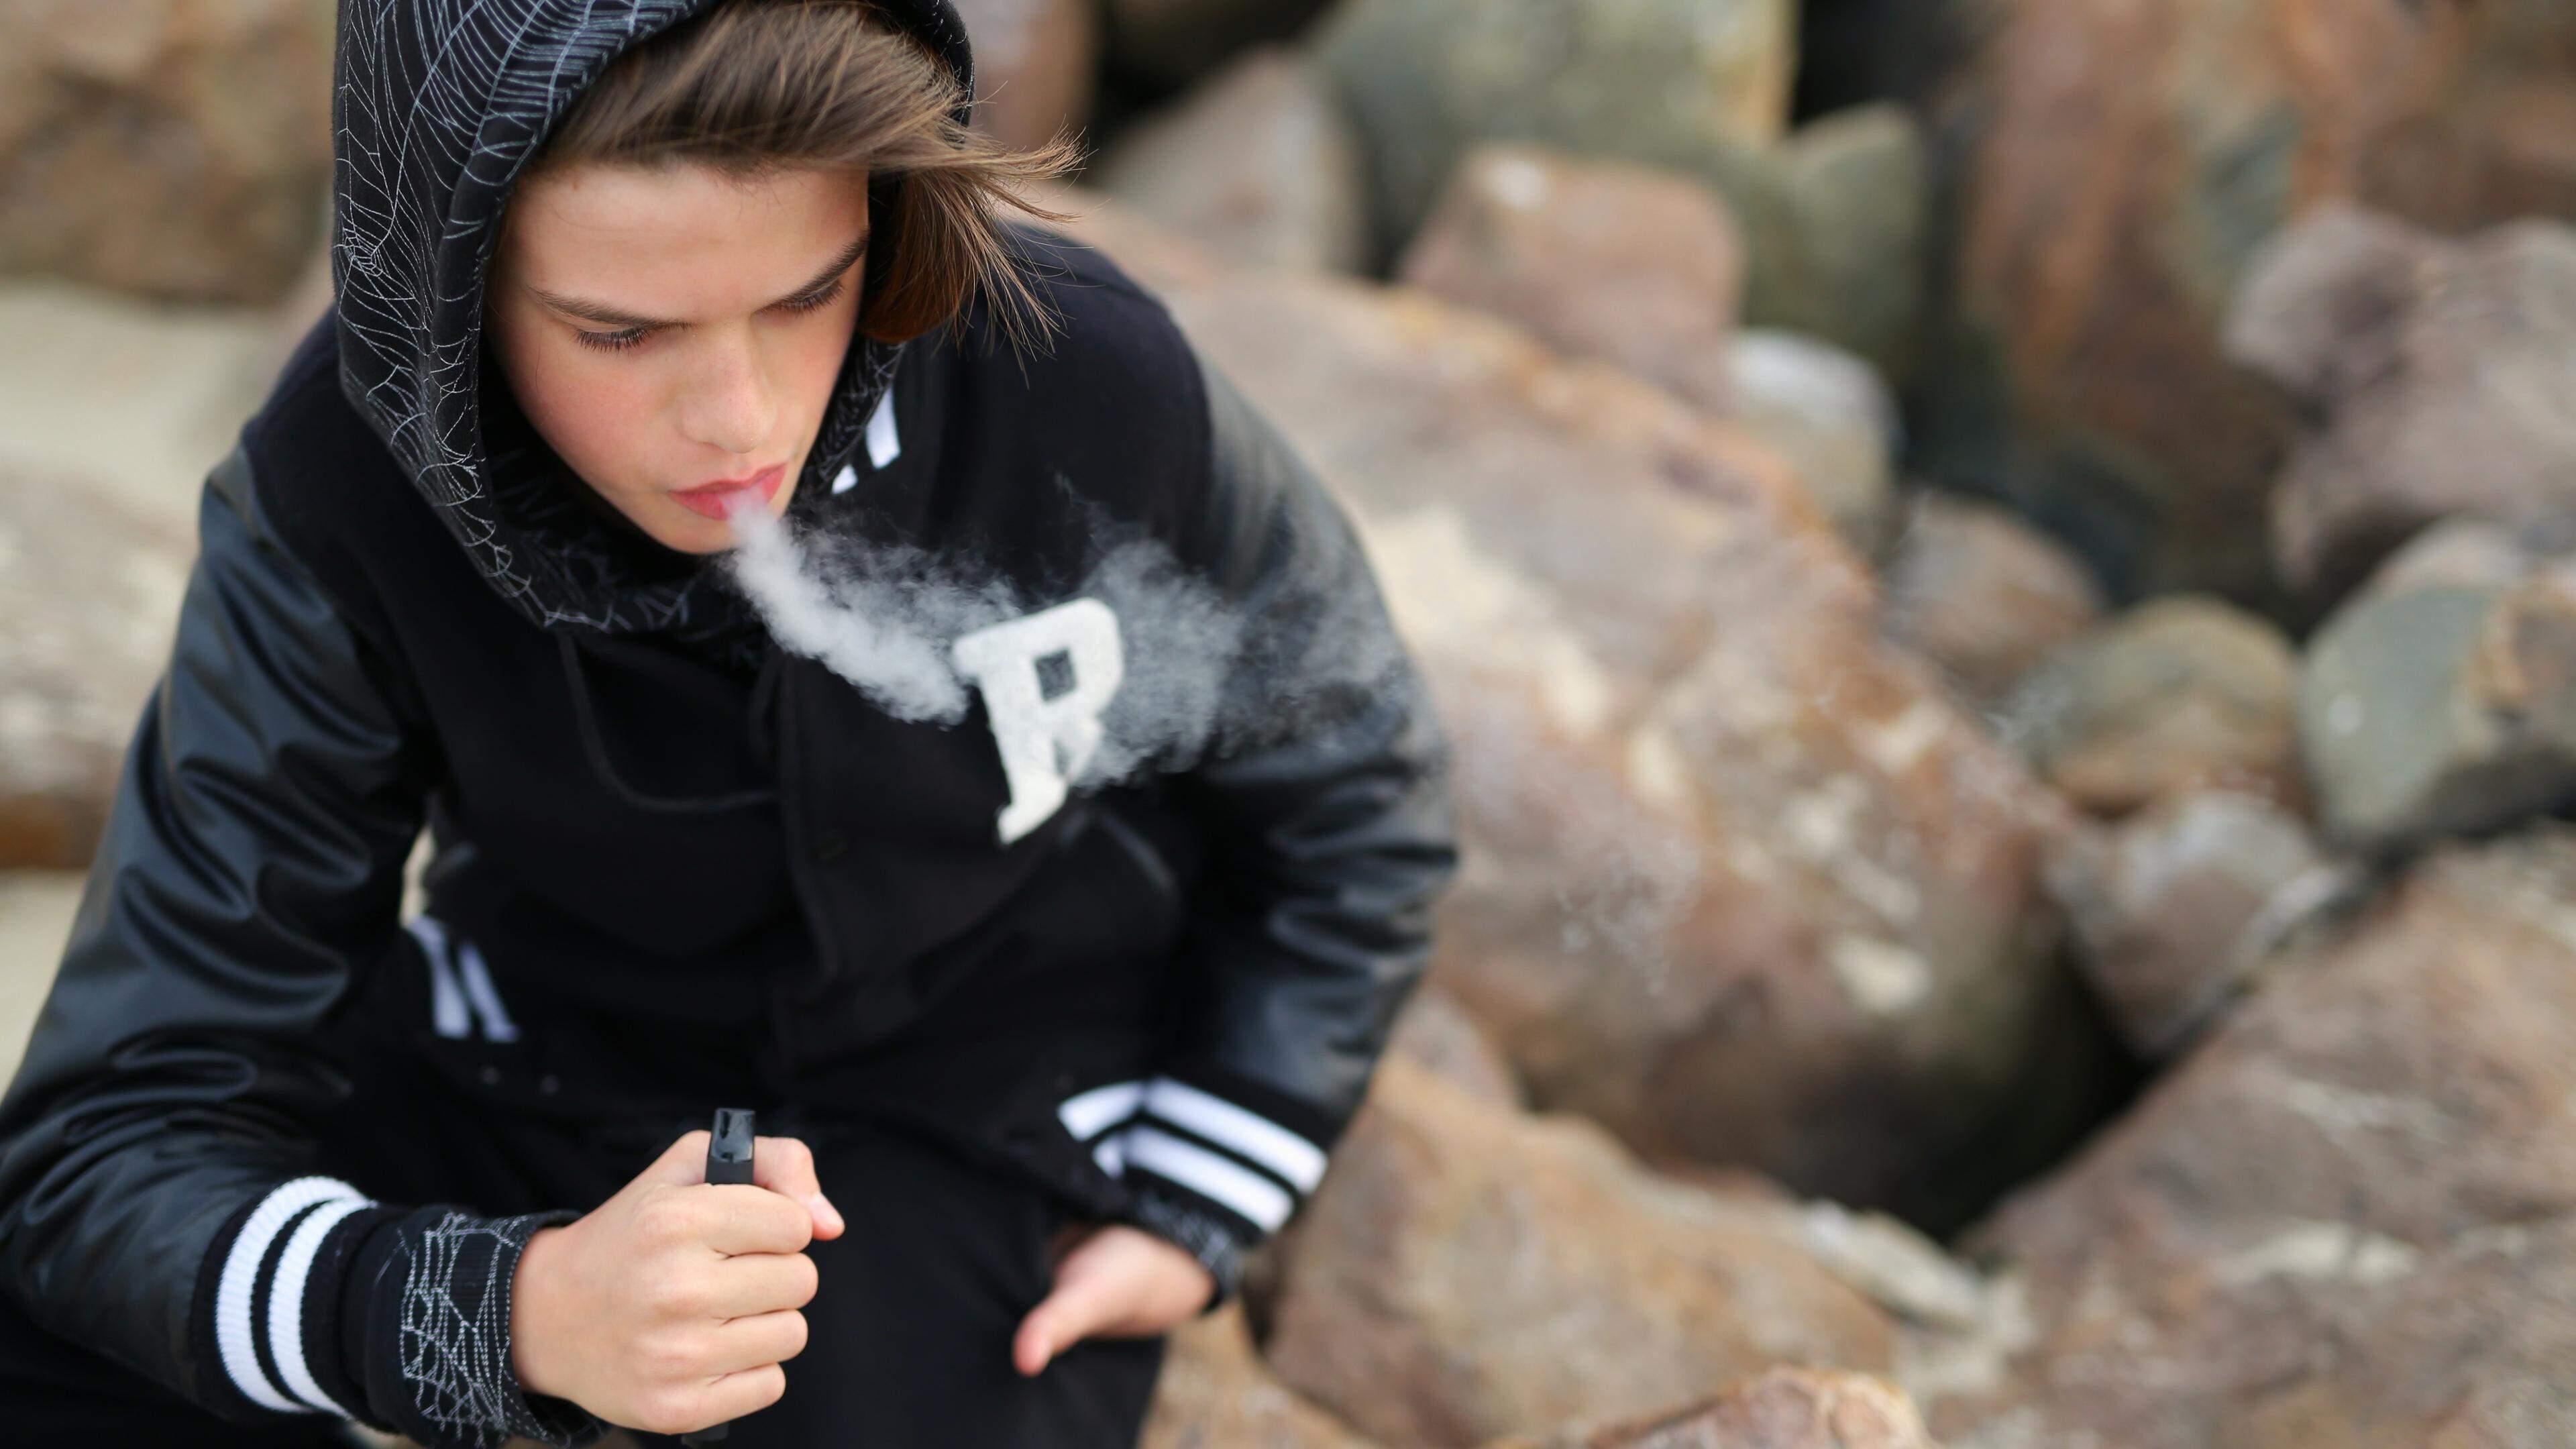 Among the under 25s, the rate of vaping jumped from 21% in 2022 to 36% in 2023